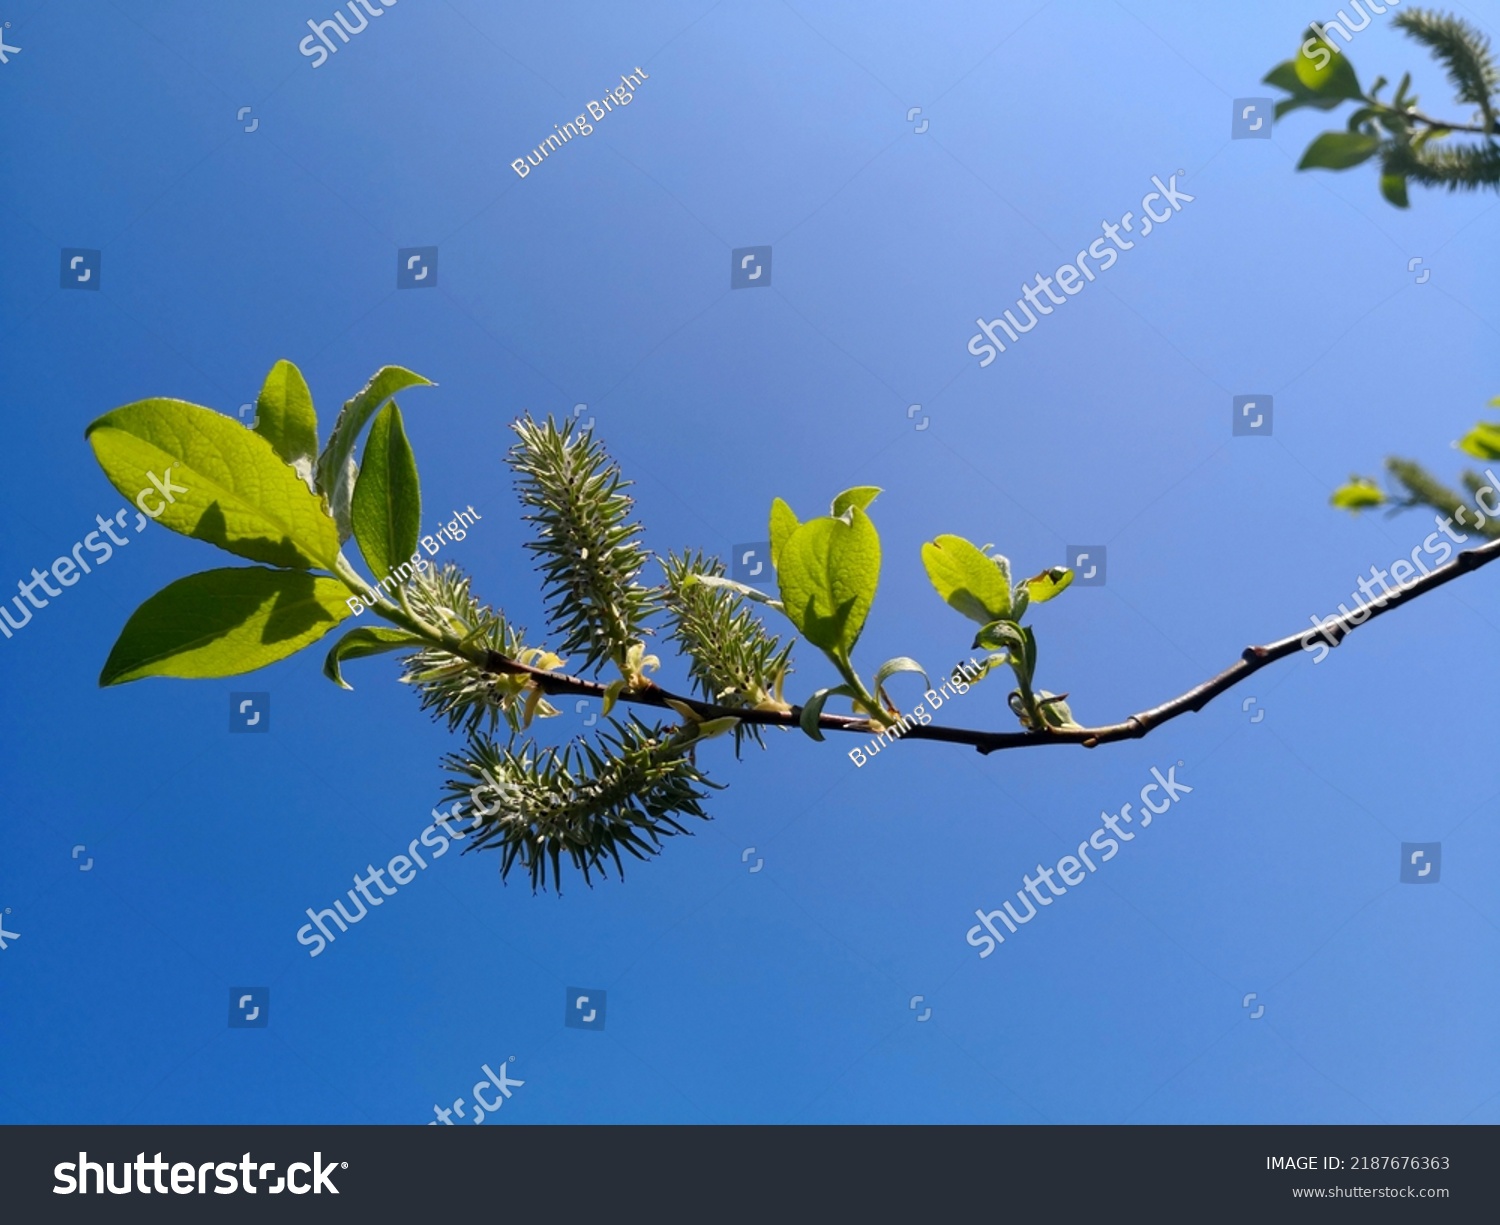 Twig of long-beaked willow (Salix bebbiana, Bebb's willow or diamond willow) with grey catkins and fresh green leaves in sunlight in background of bright blue sky. Image of flowering tree in spring #2187676363